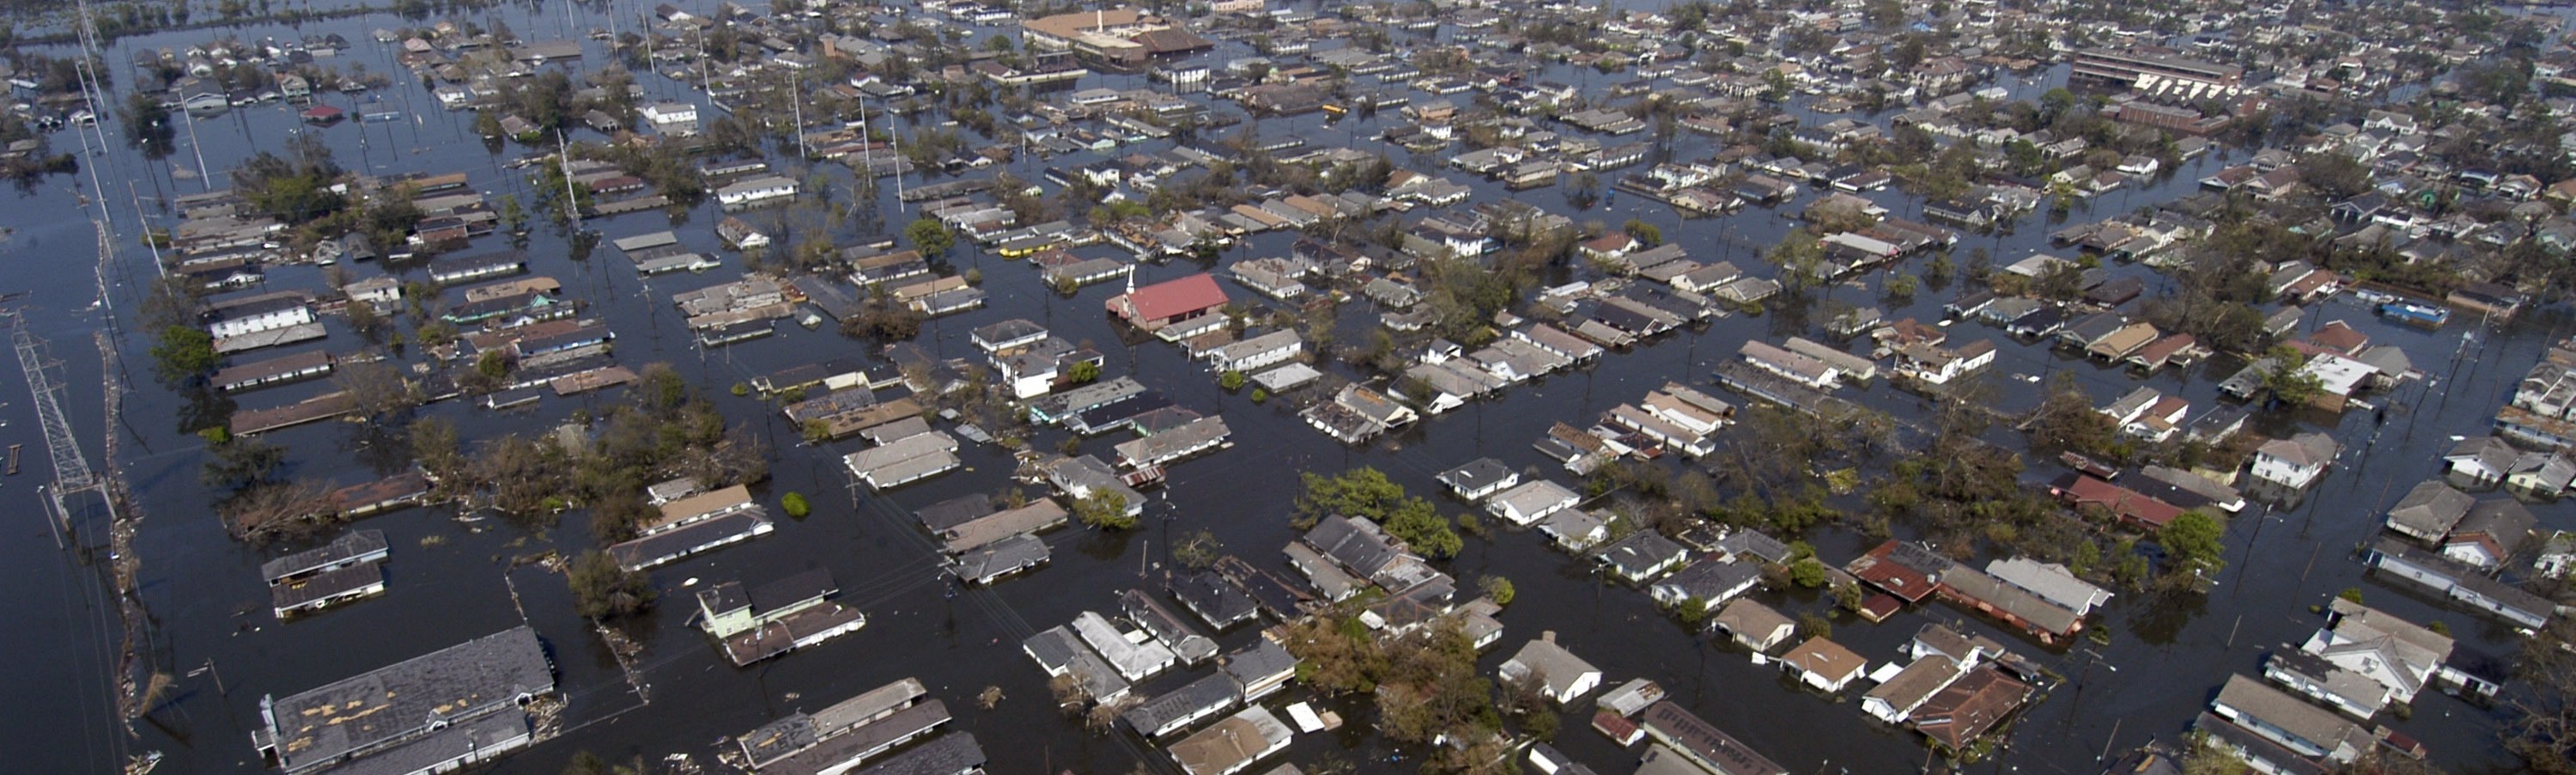 Flooding caused by storm surge